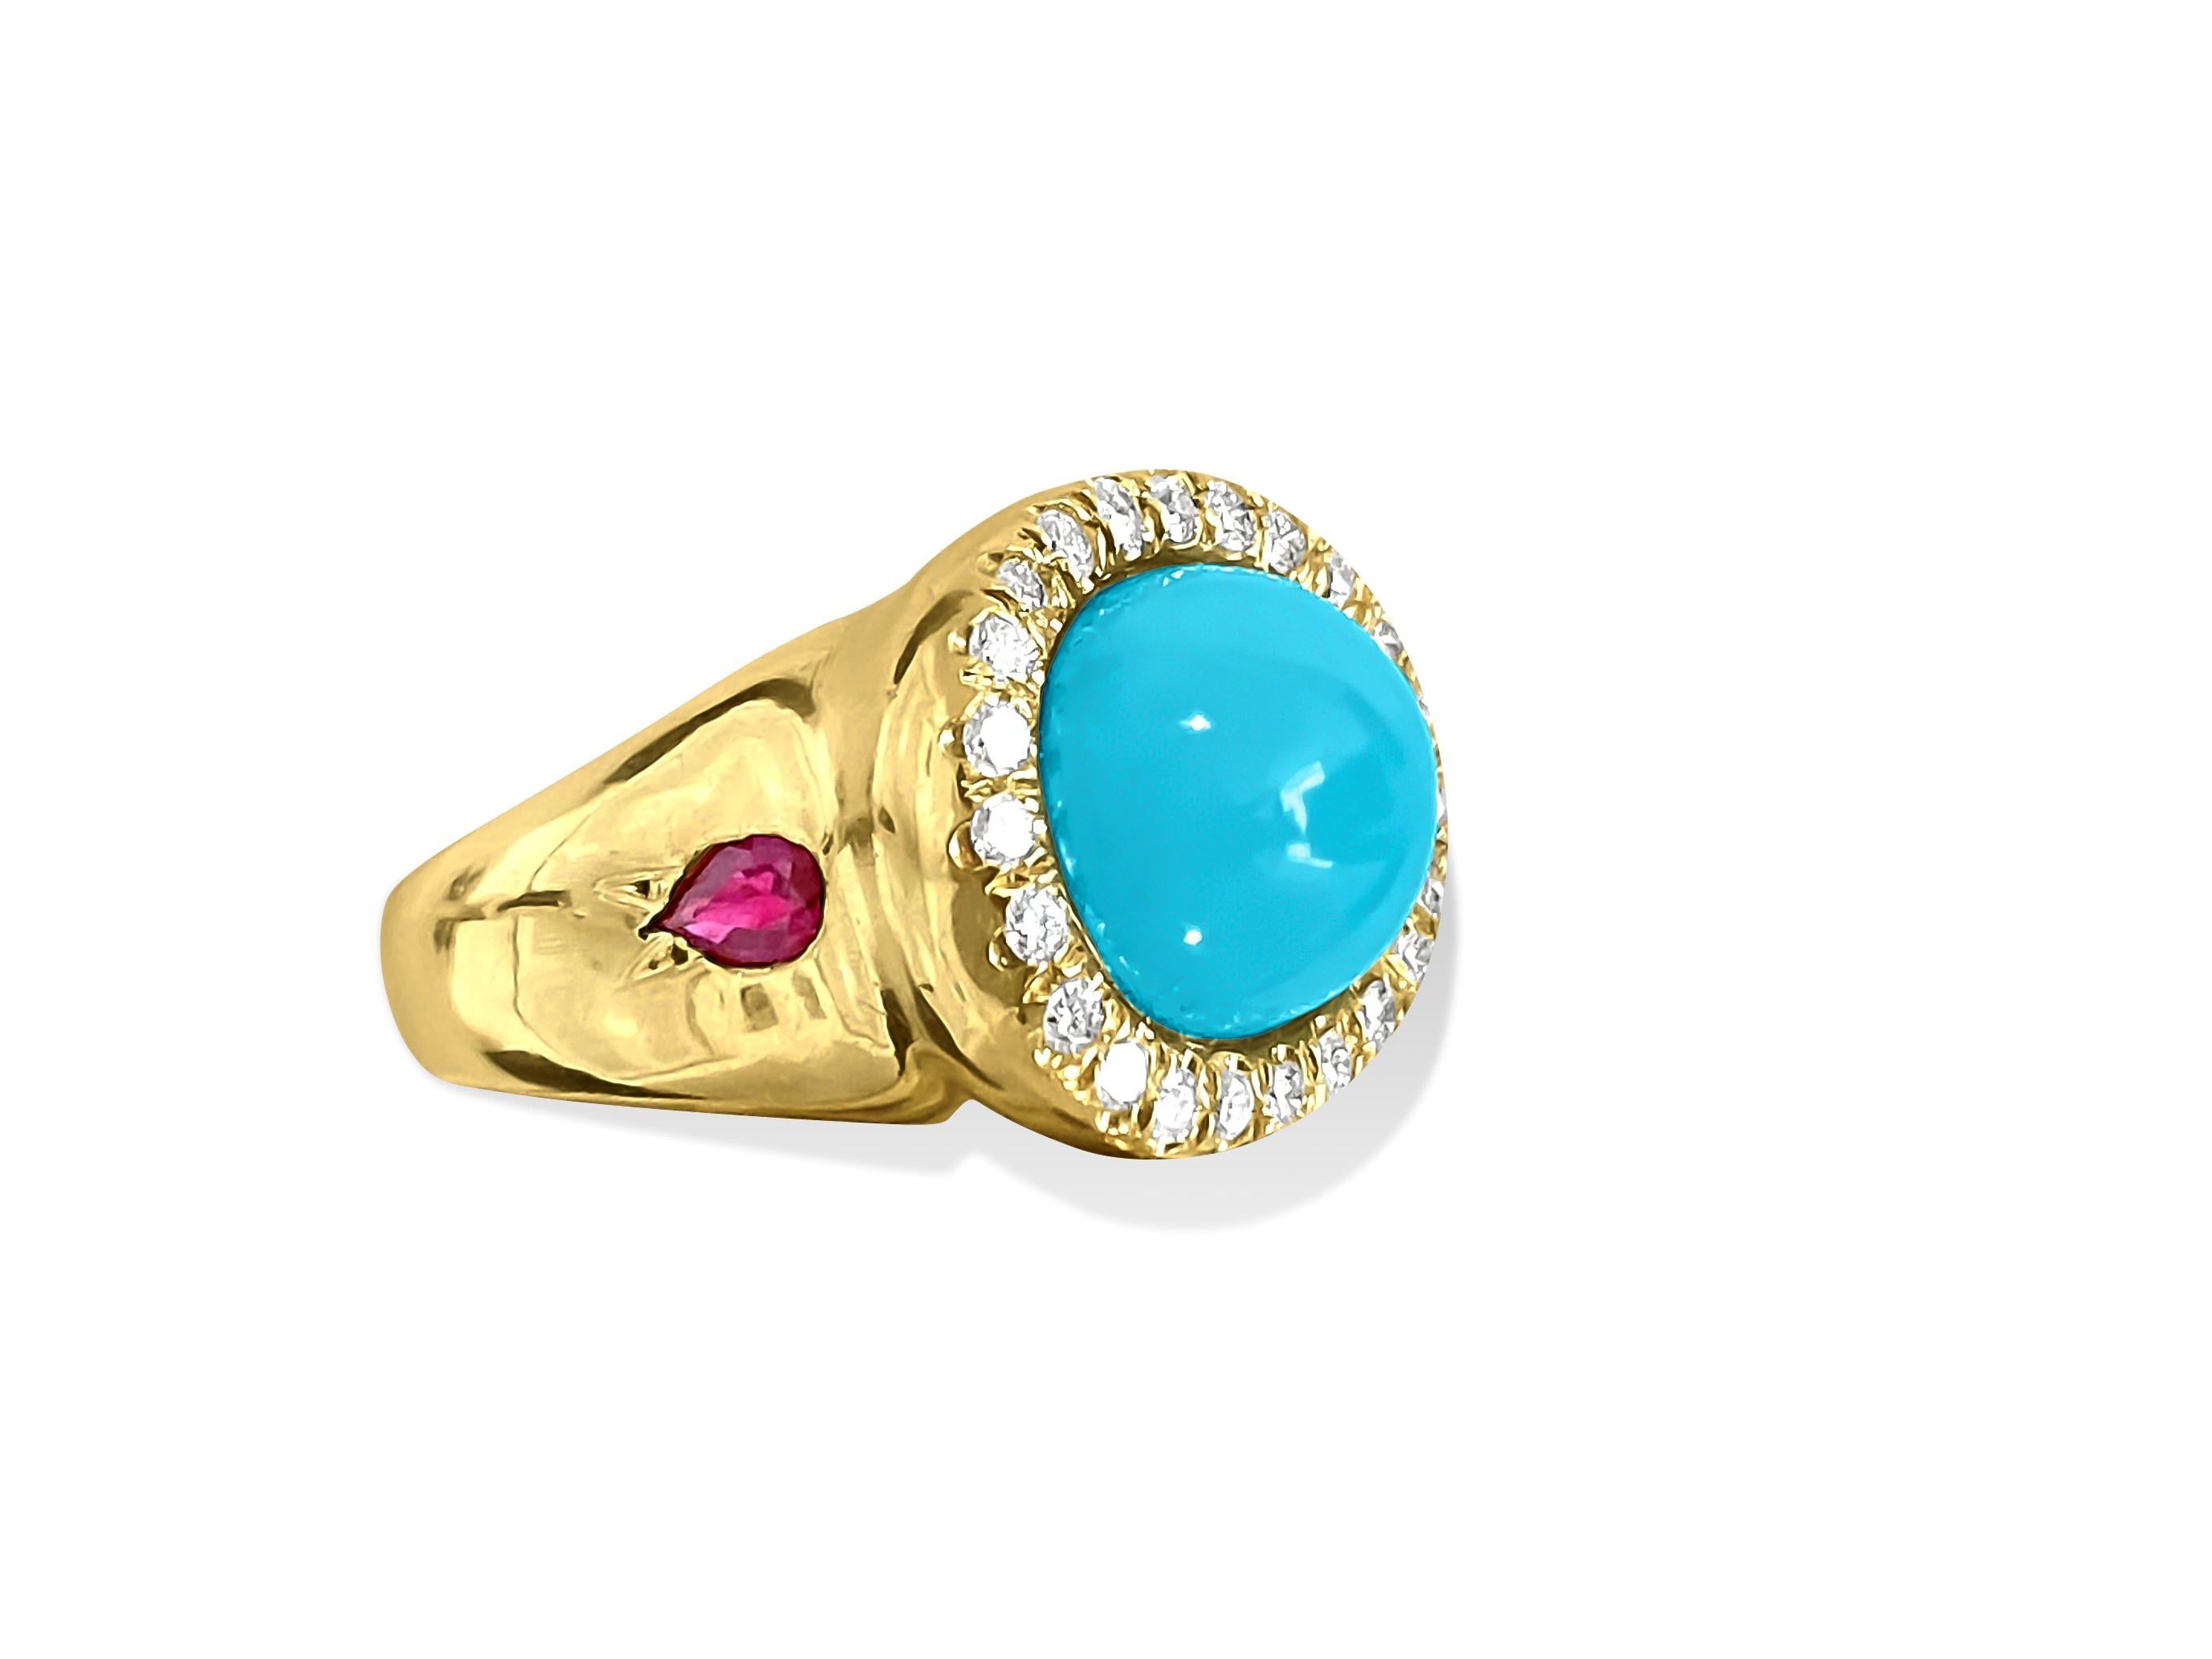 This is an 18-karat yellow gold ring with a main turquoise stone in the middle. There are also smaller diamonds on the sides, totaling 1.00 carat, with VS clarity and G color. Round-cut rubies are also set on the sides. All the precious stones are